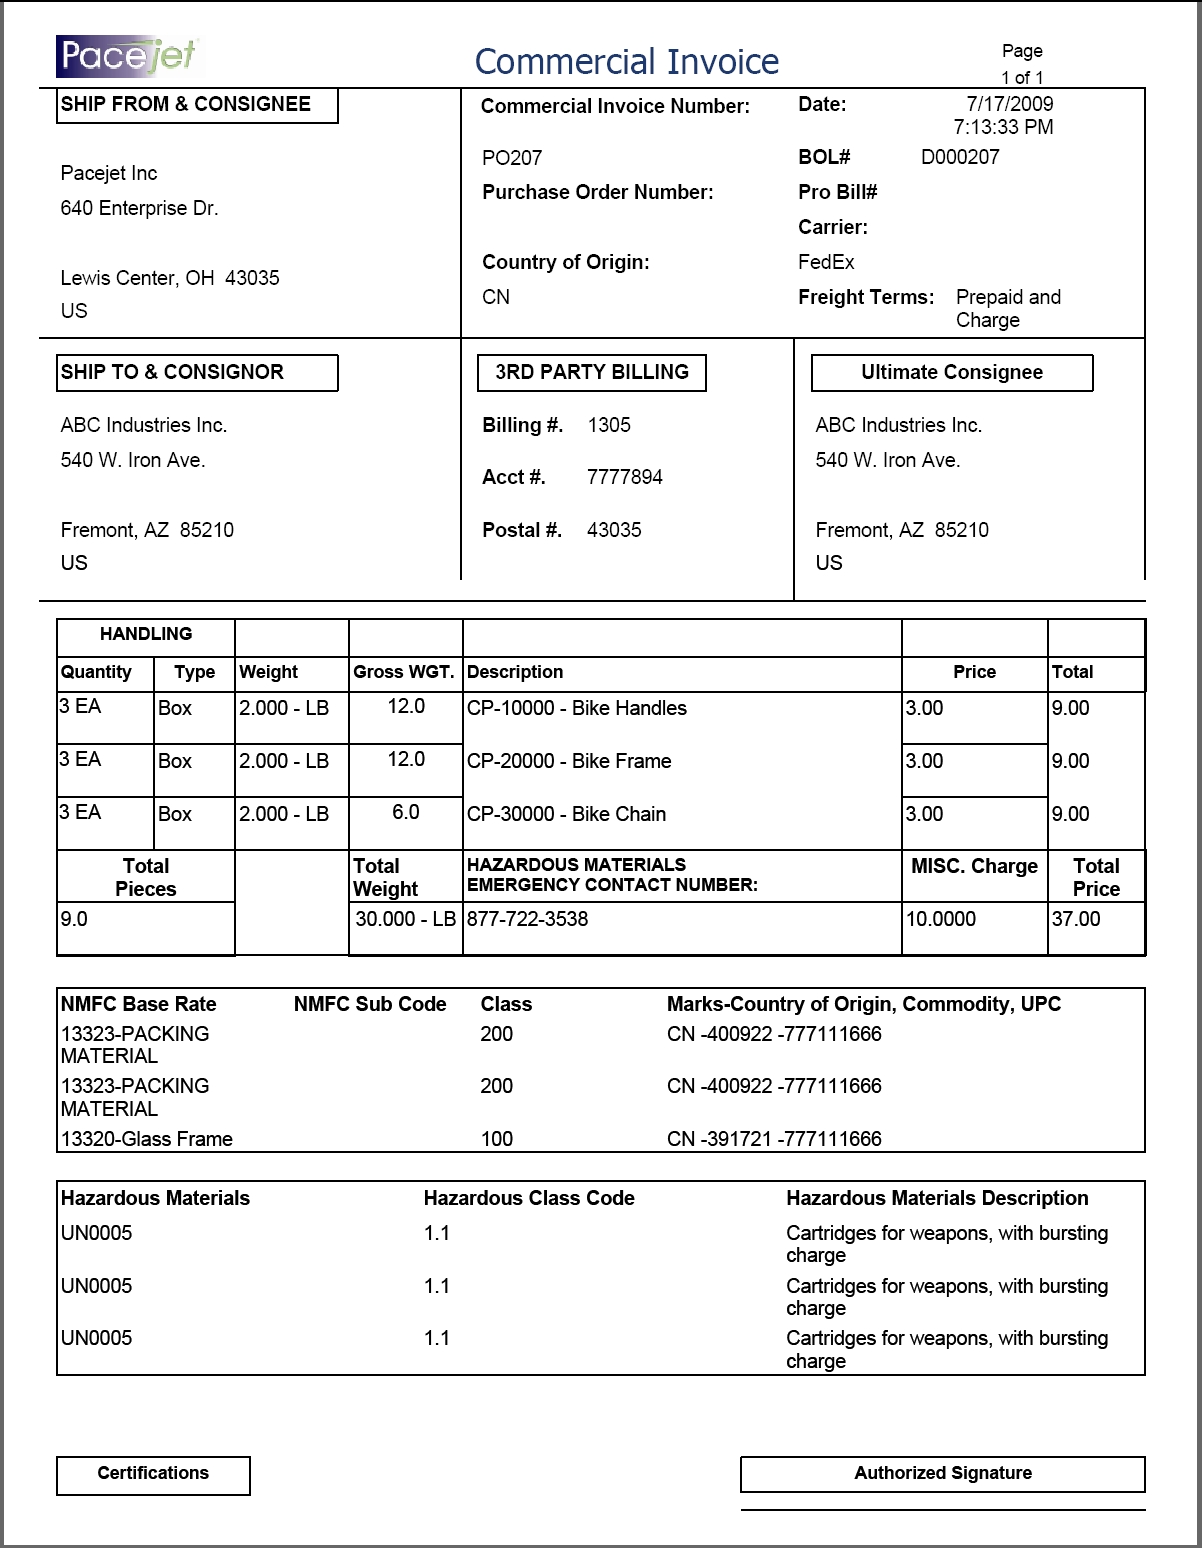 export shipping pacejet commercial invoice requirements for export